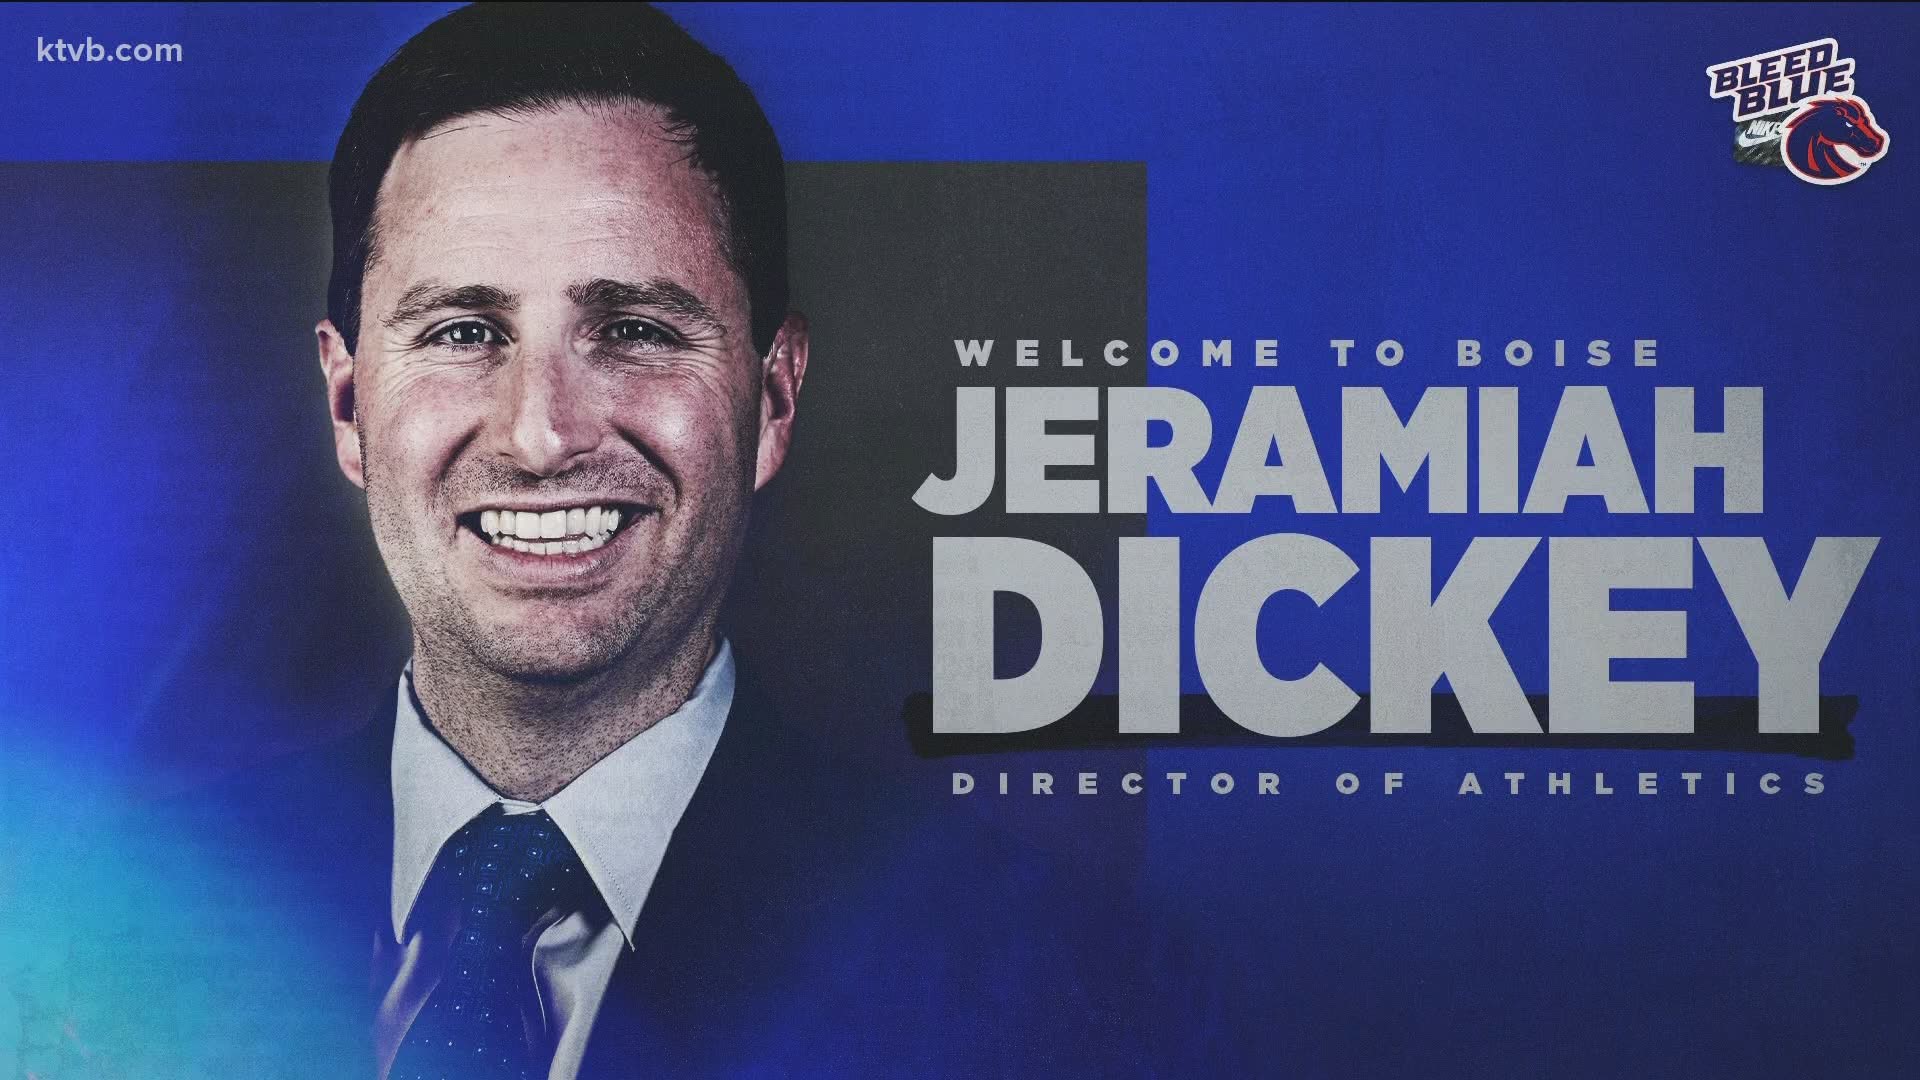 The university made the announcement on Saturday evening after multiple reports pointed to Dickey on Friday.